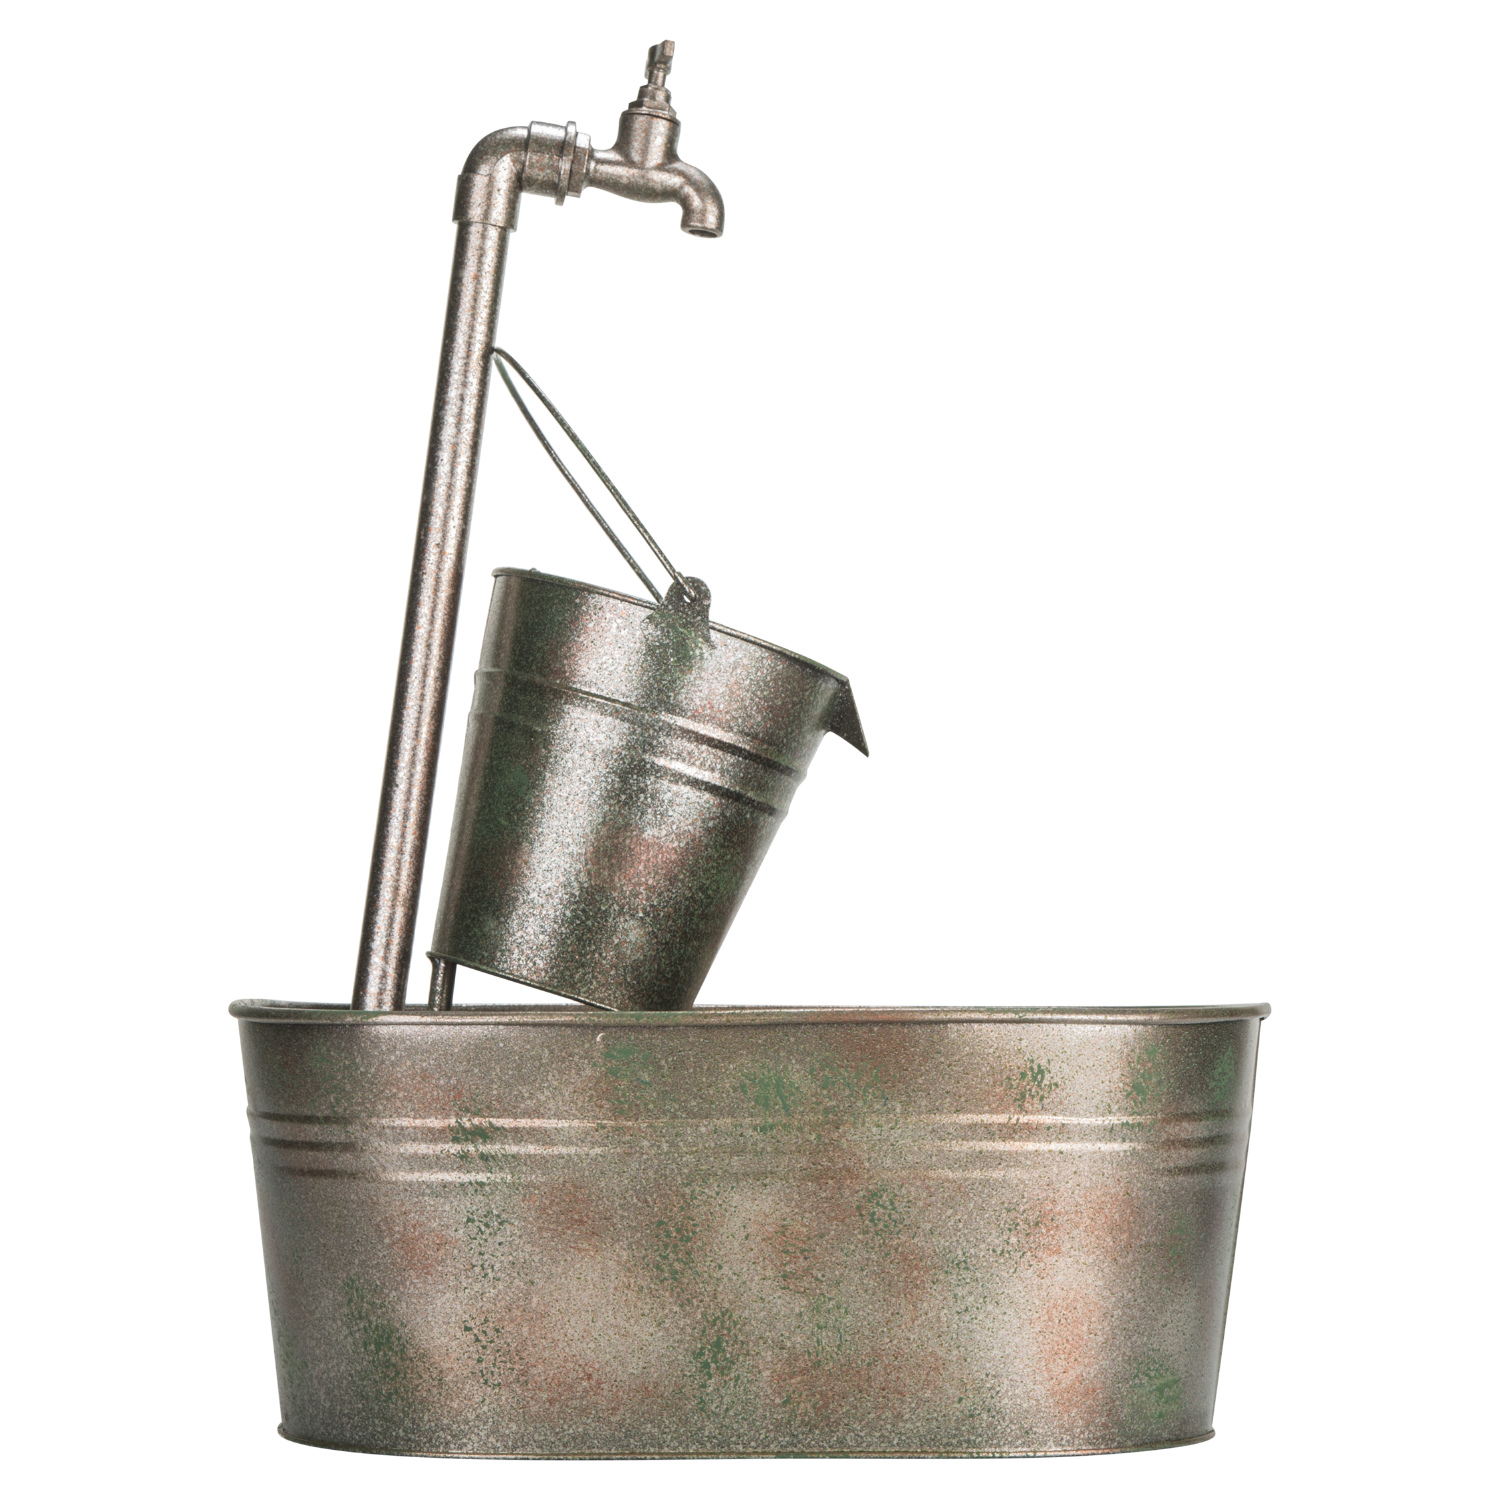 Vintage Bucket and Wash Tub Fountain Water Feature Image